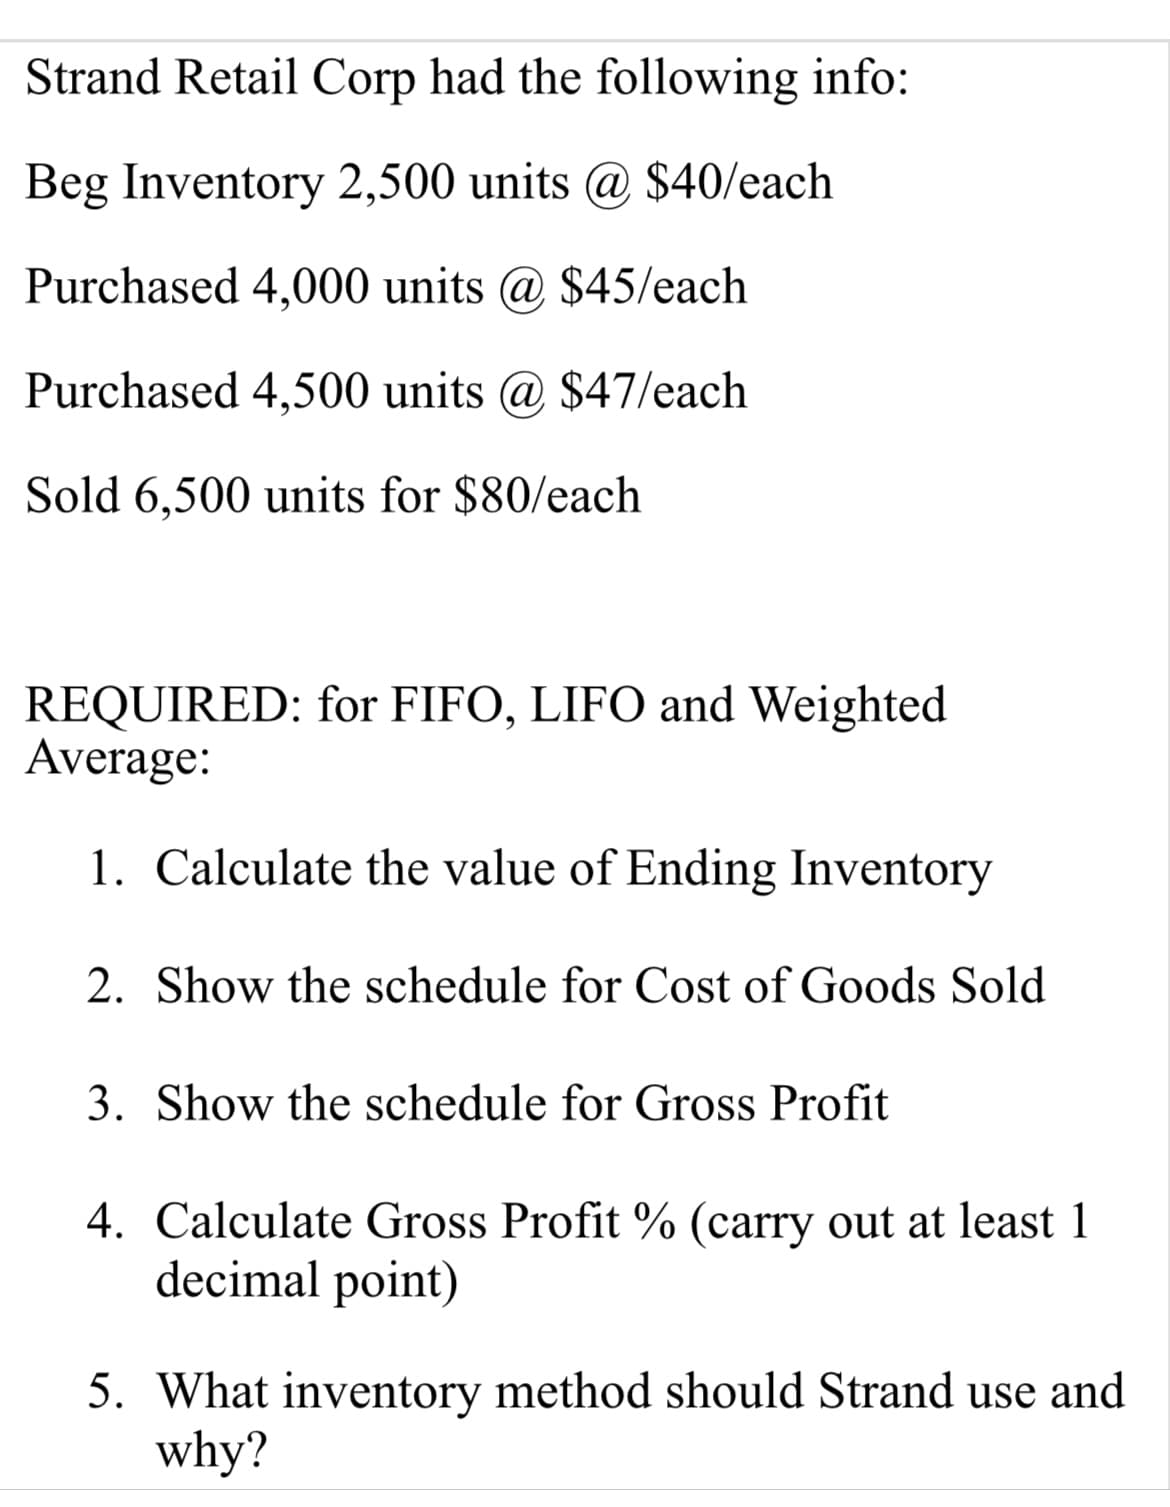 Strand Retail Corp had the following info:
Beg Inventory 2,500 units @ $40/each
Purchased 4,000 units @ $45/each
Purchased 4,500 units @ $47/each
Sold 6,500 units for $80/each
REQUIRED: for FIFO, LIFO and Weighted
Average:
1. Calculate the value of Ending Inventory
2. Show the schedule for Cost of Goods Sold
3. Show the schedule for Gross Profit
4. Calculate Gross Profit % (carry out at least 1
decimal point)
5. What inventory method should Strand use and
why?
